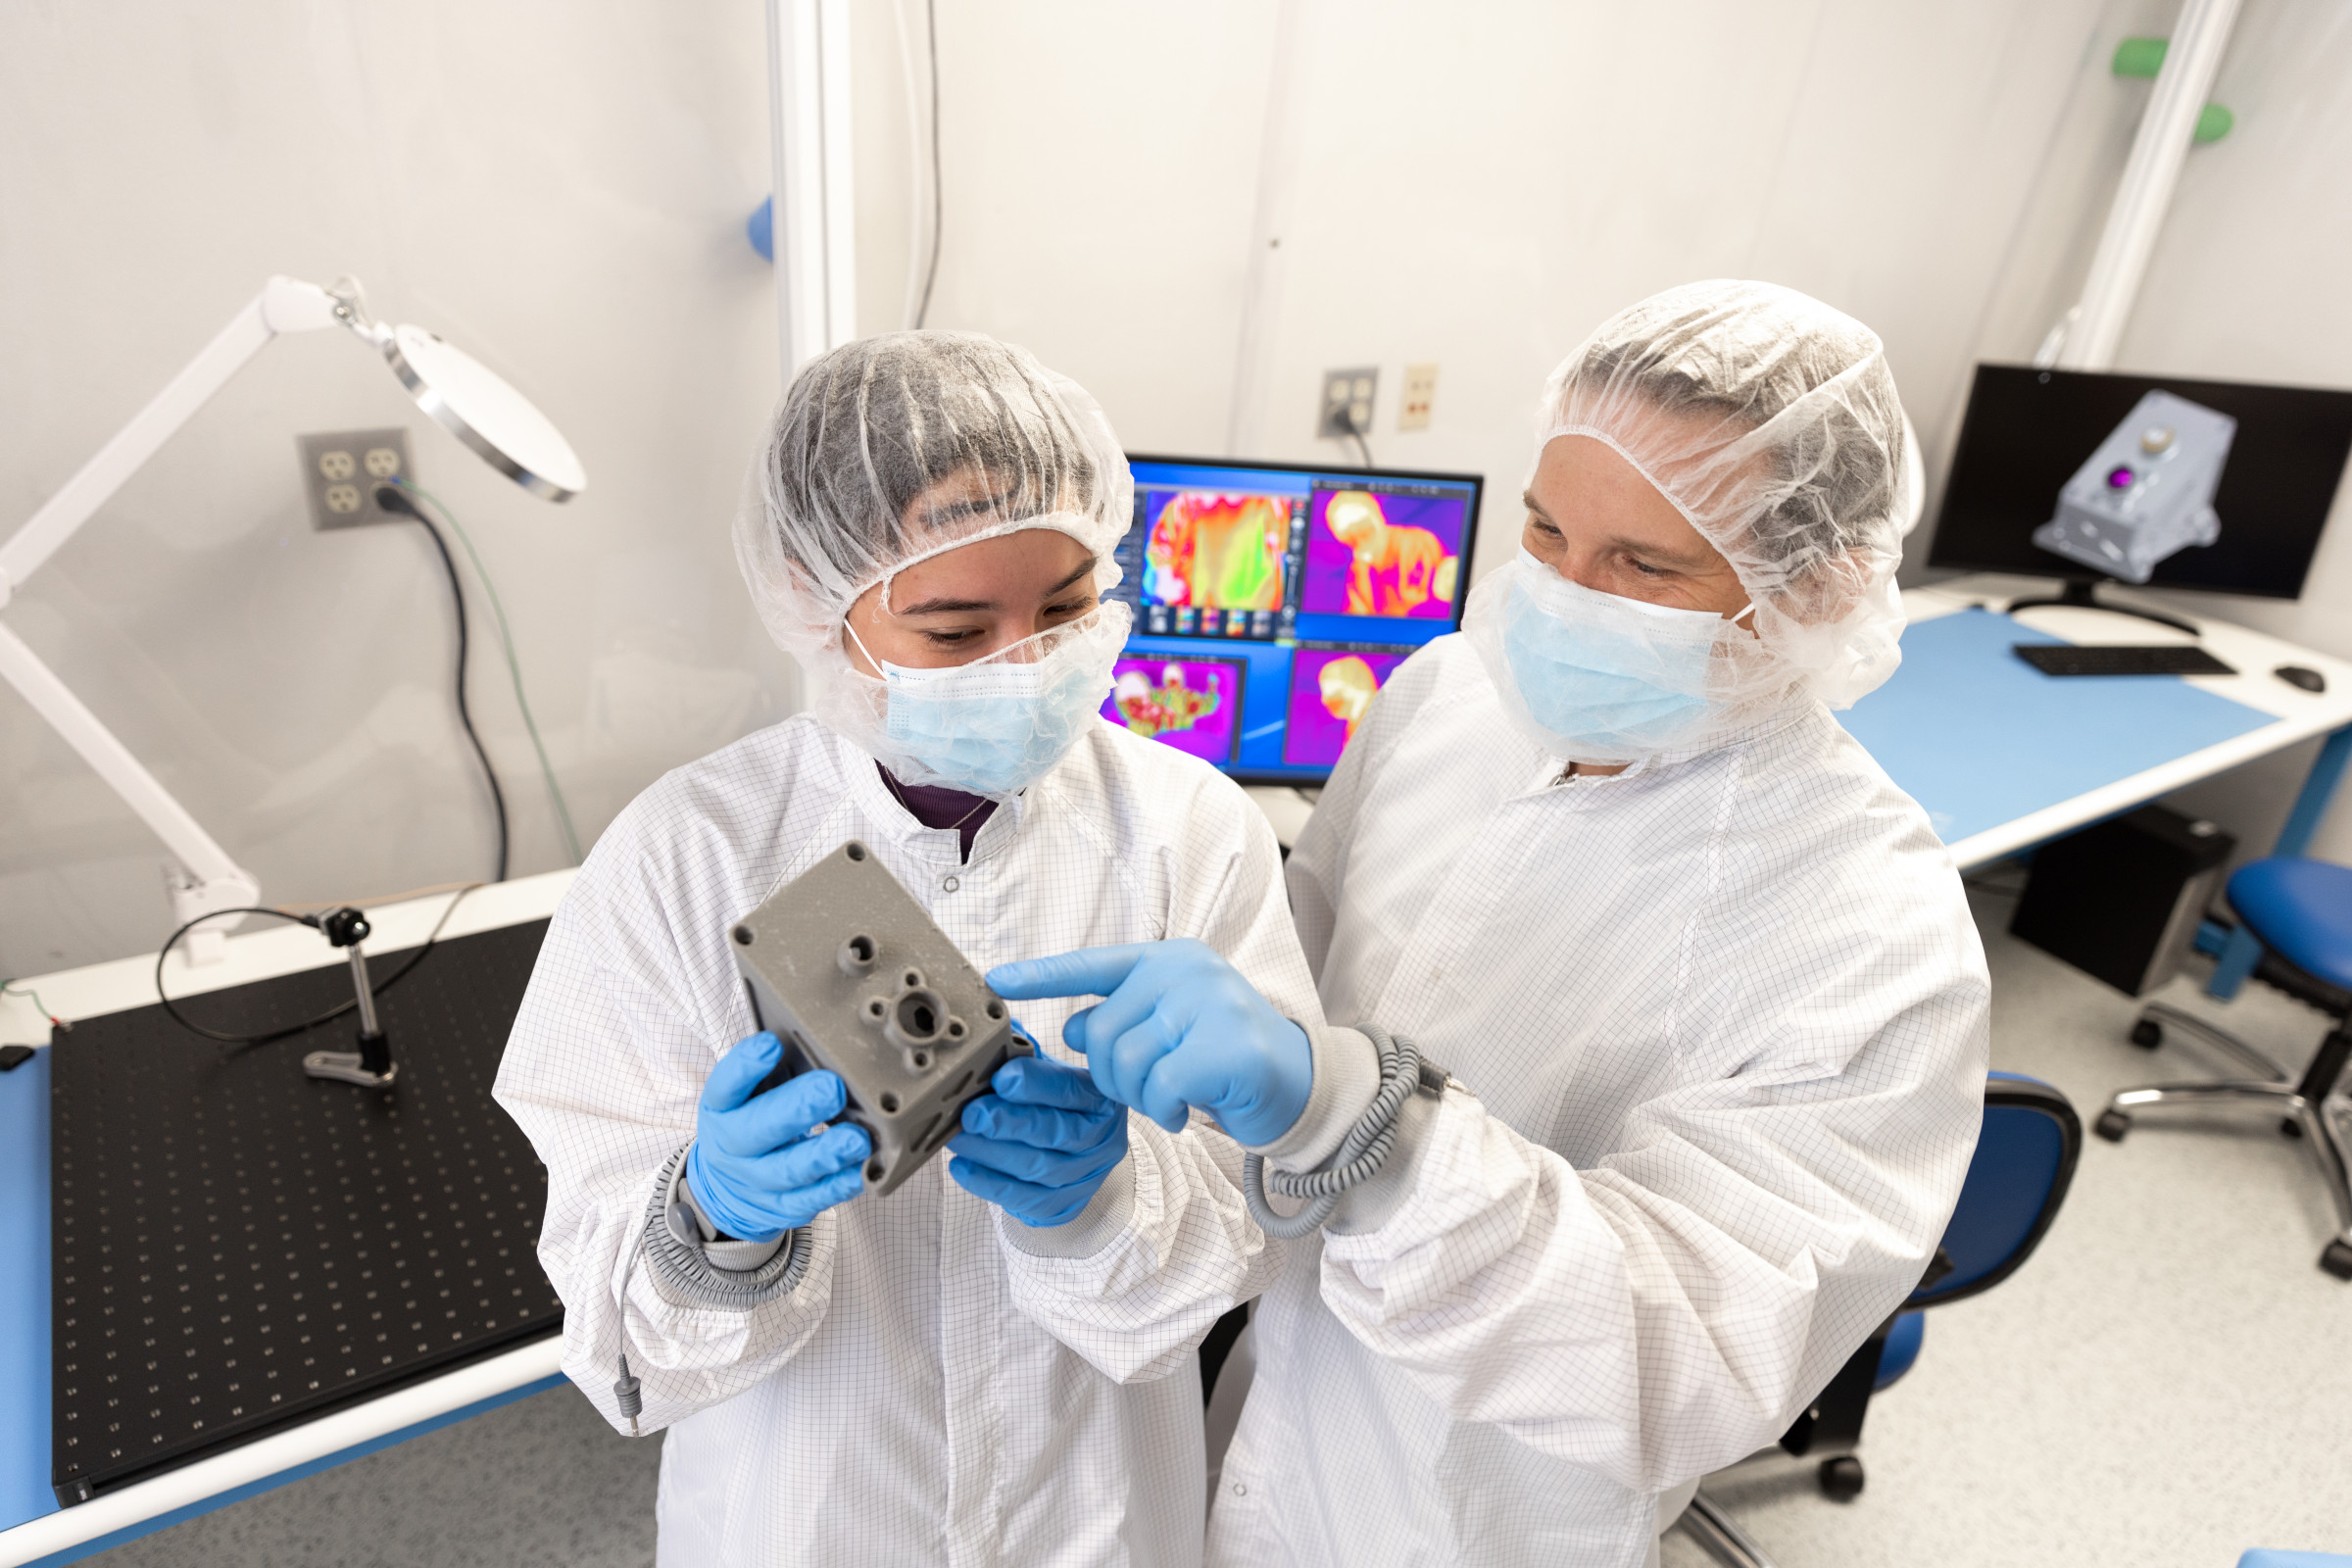 Planetary science researchers inspecting technology in lab